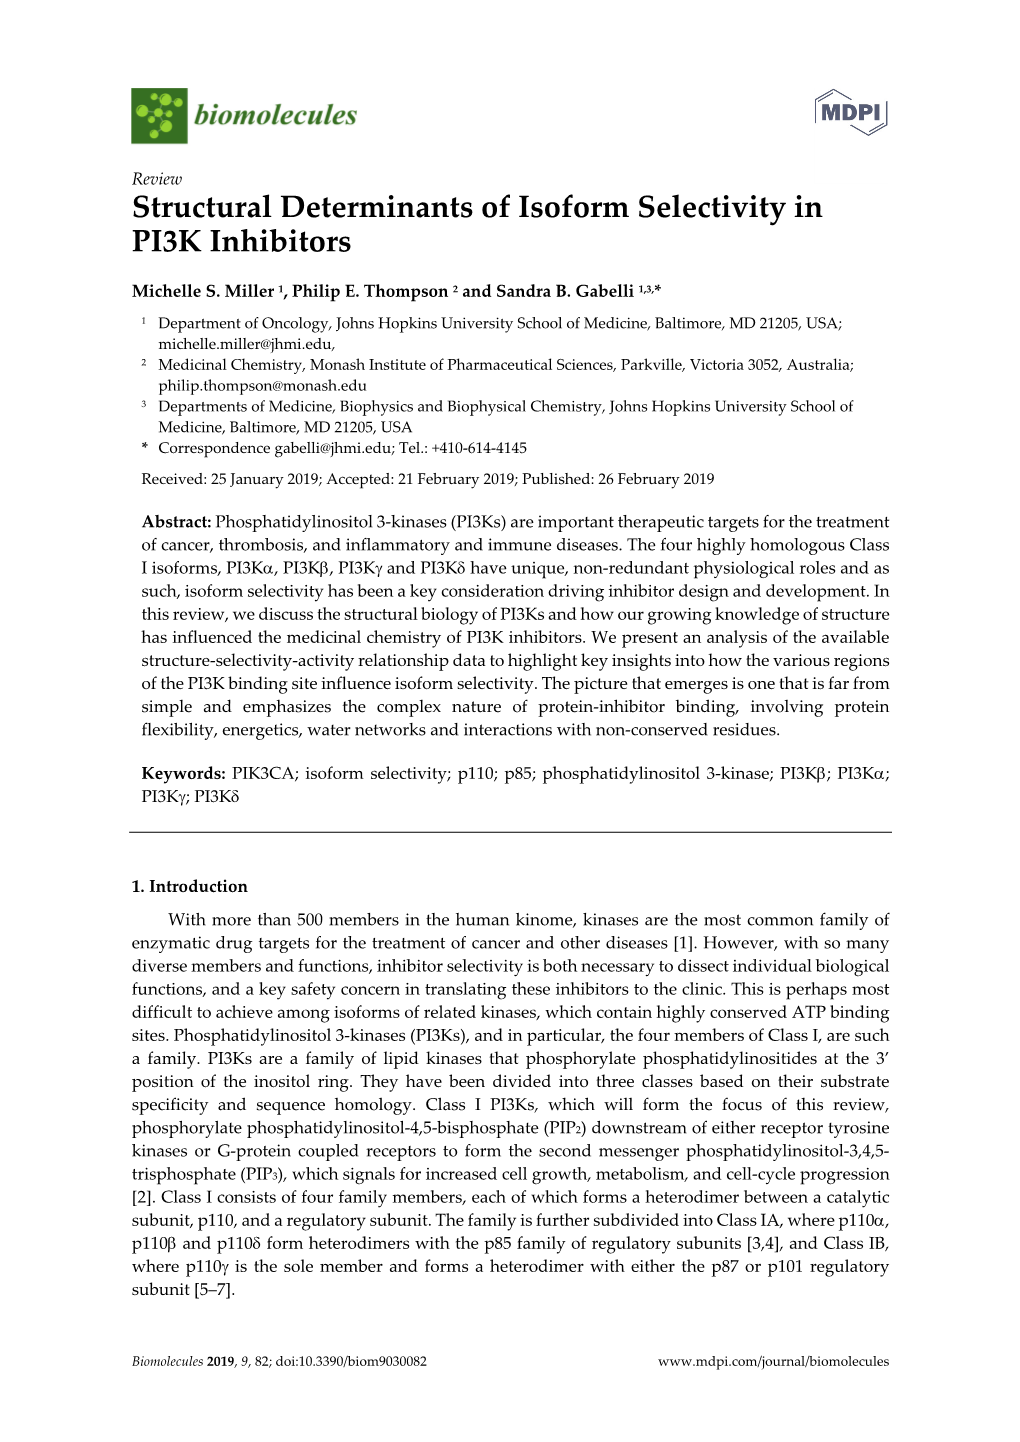 Structural Determinants of Isoform Selectivity in PI3K Inhibitors